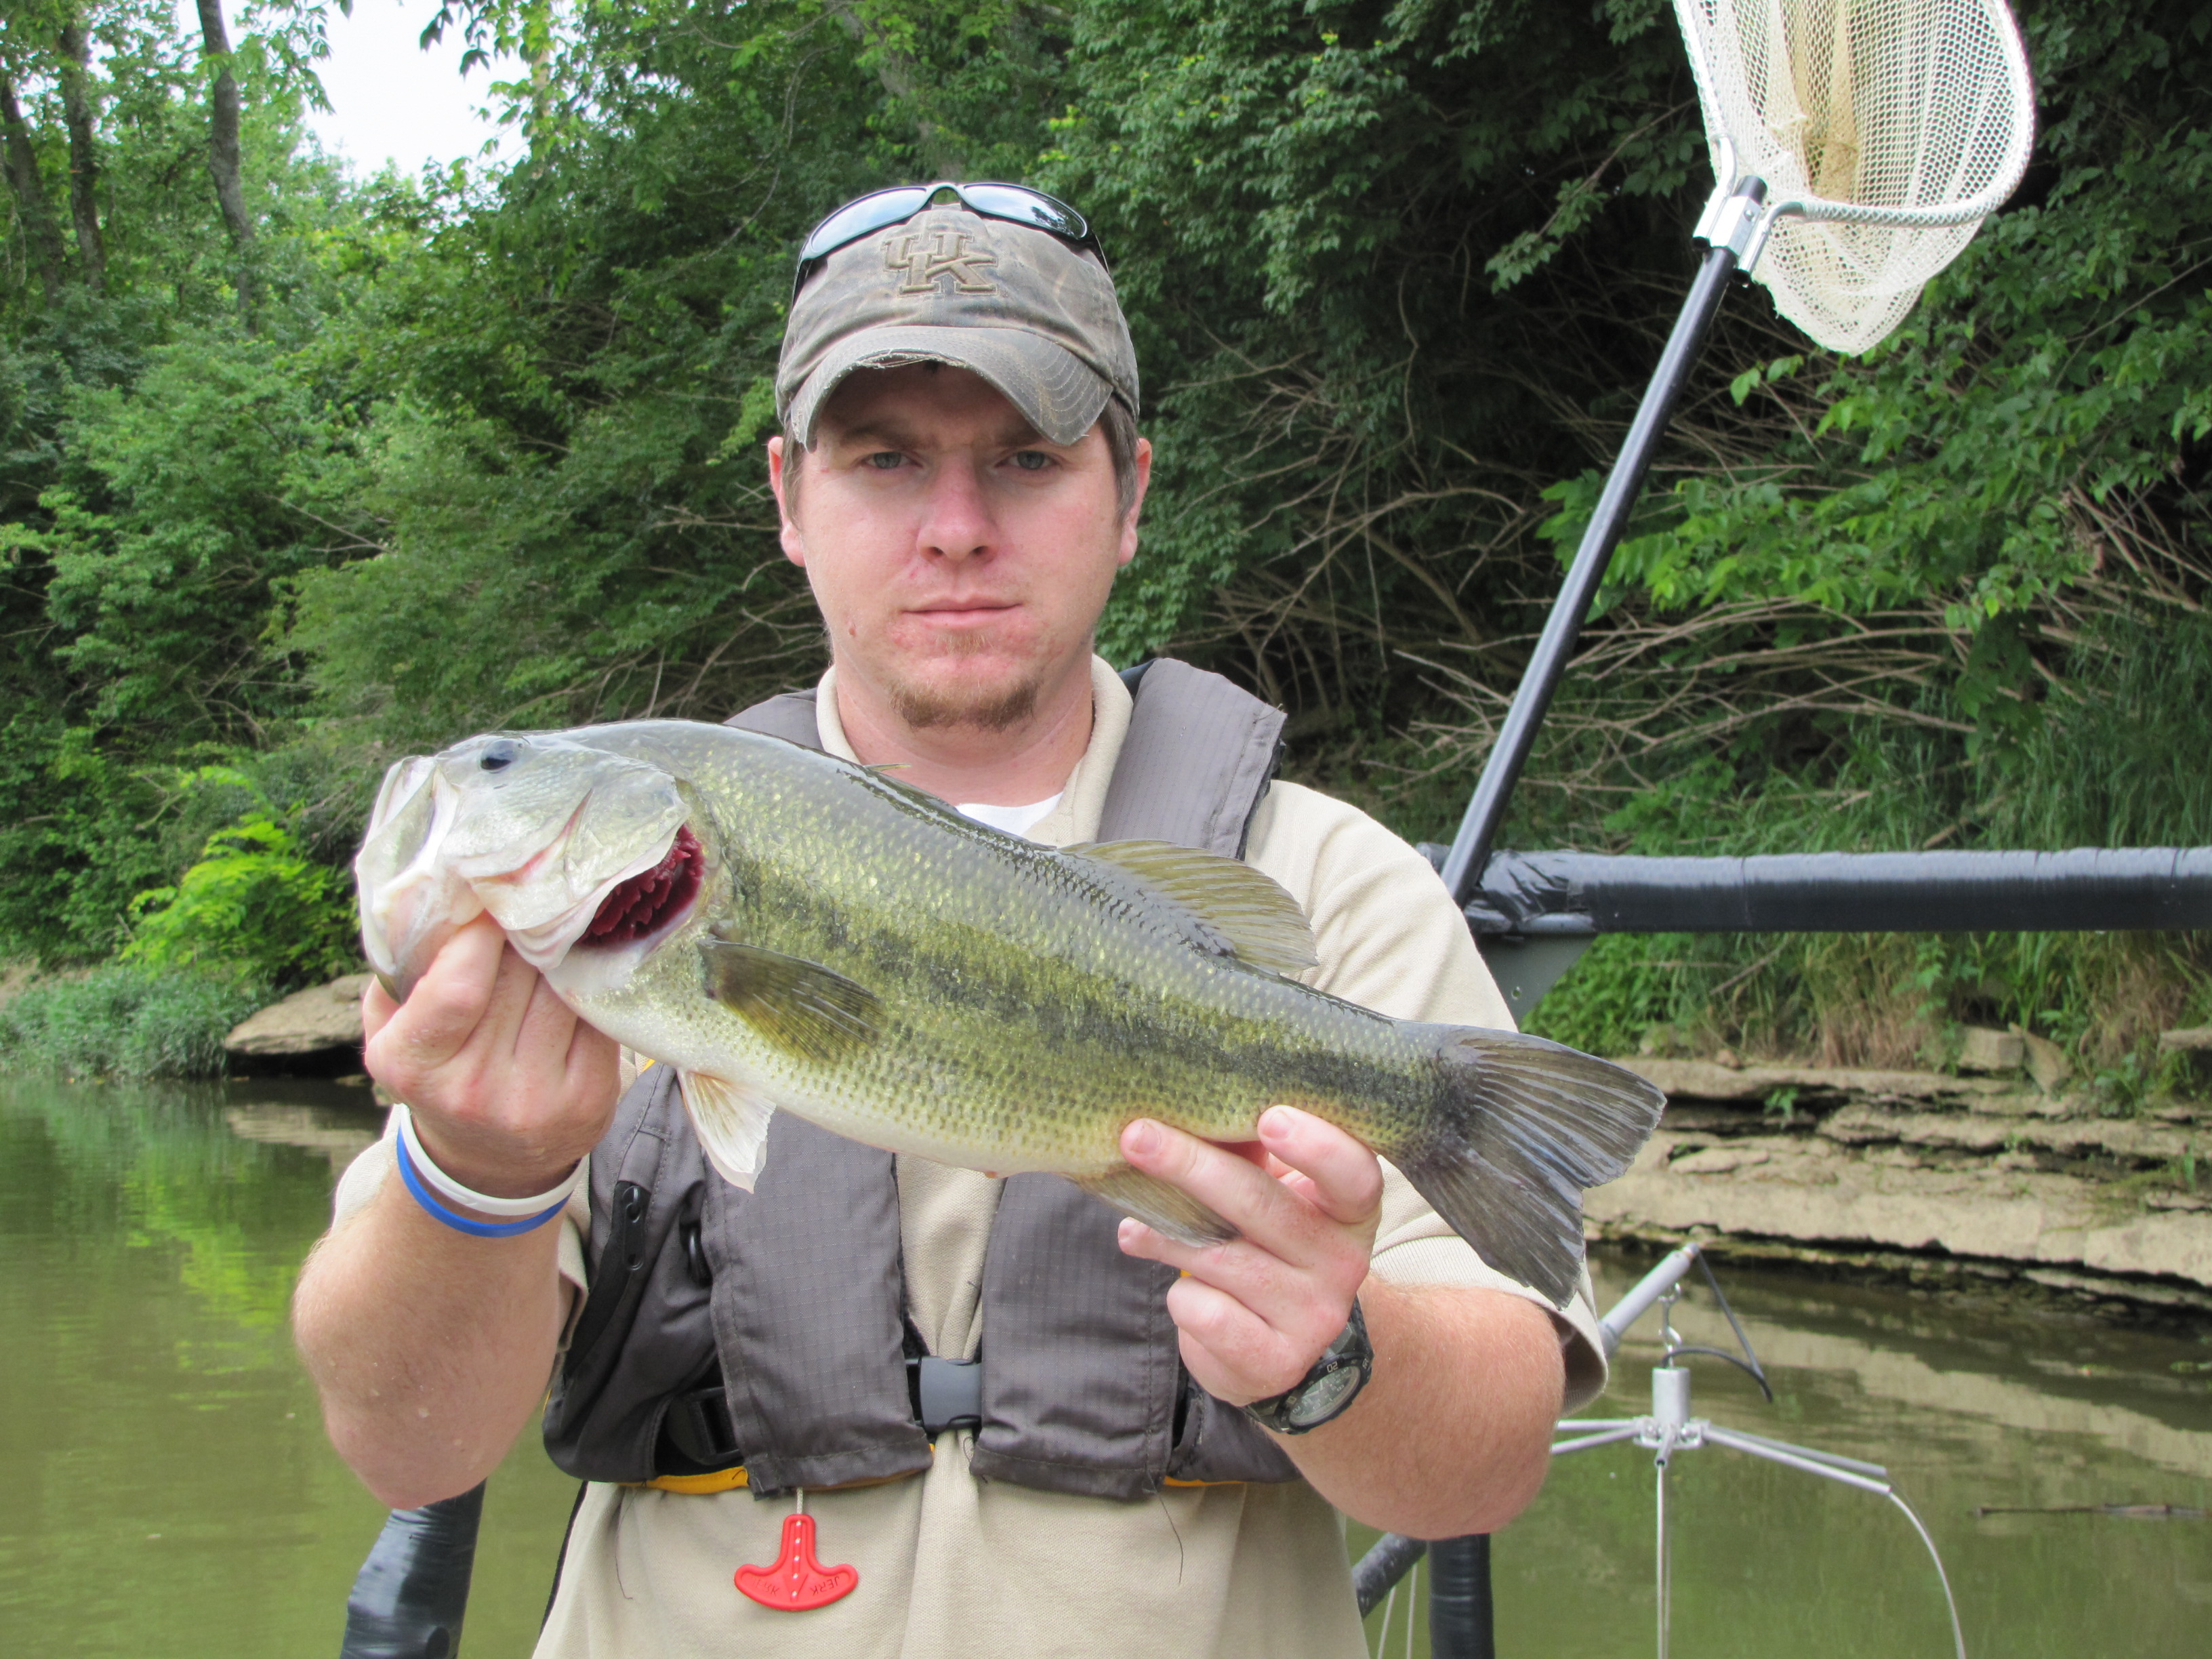 Nick Keeton, fisheries technician, holds a nice 17.0 inch largemouth bass collected and released.